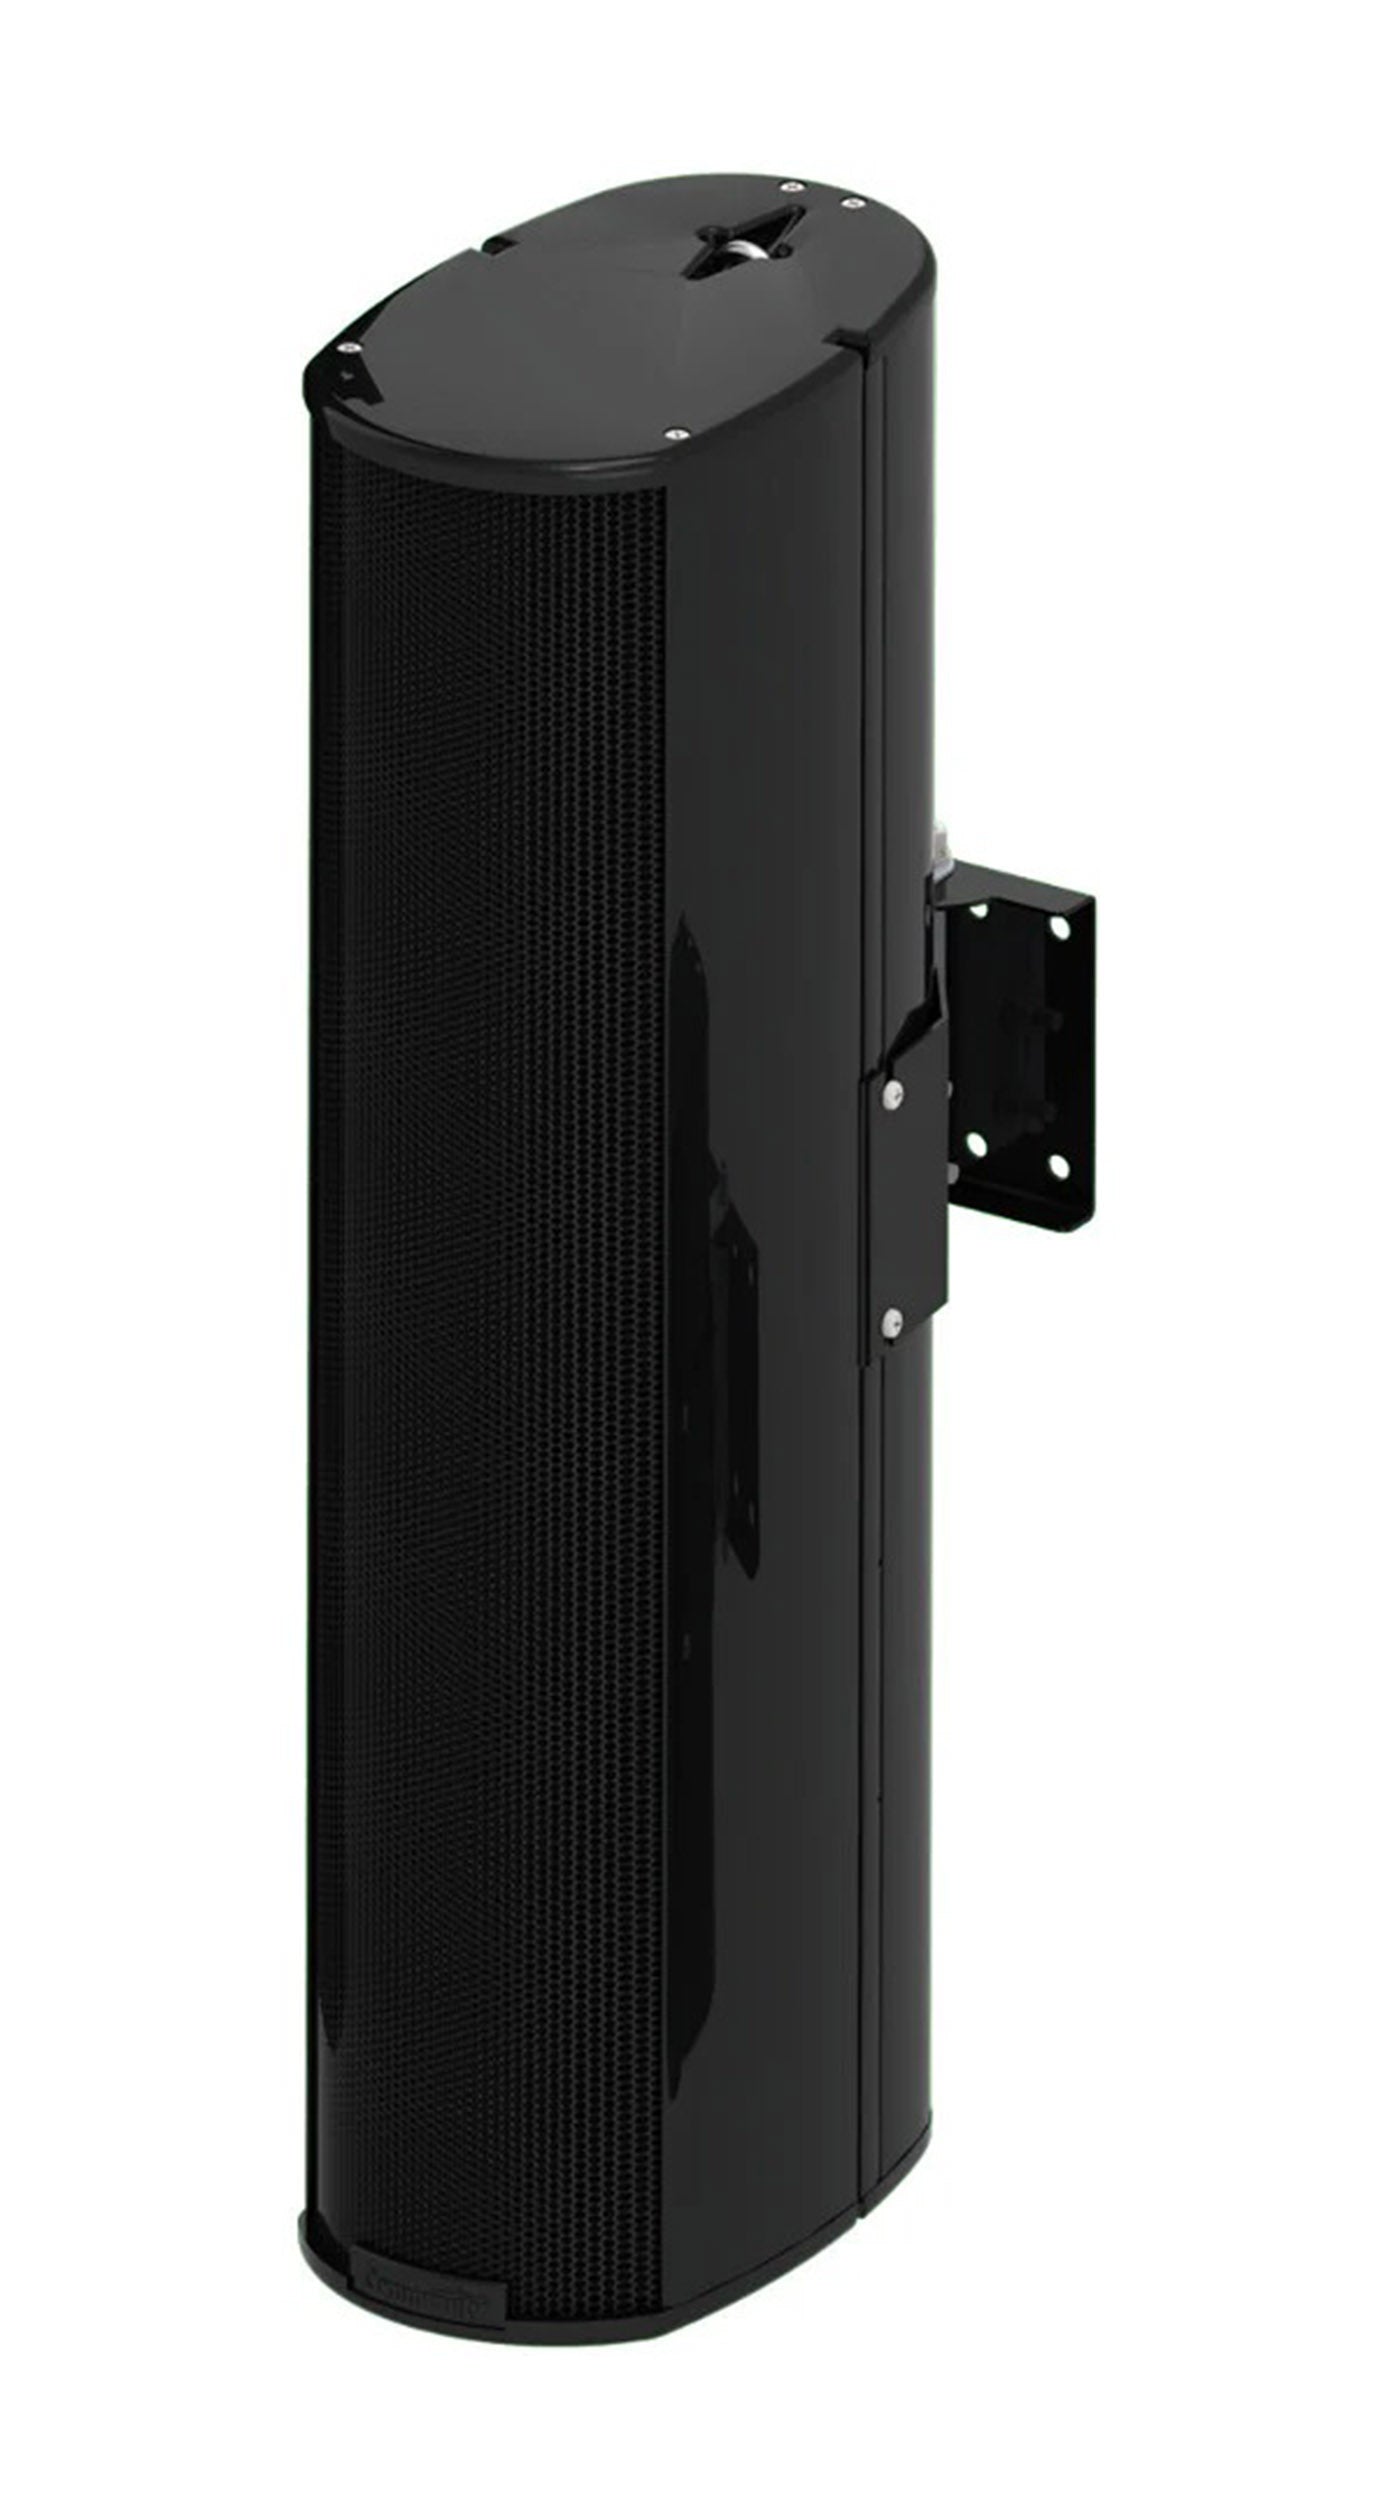 B-Stock: Community ENT206B, 2-Way Compact Column Array Speaker, Weather Resistant - Black by Community